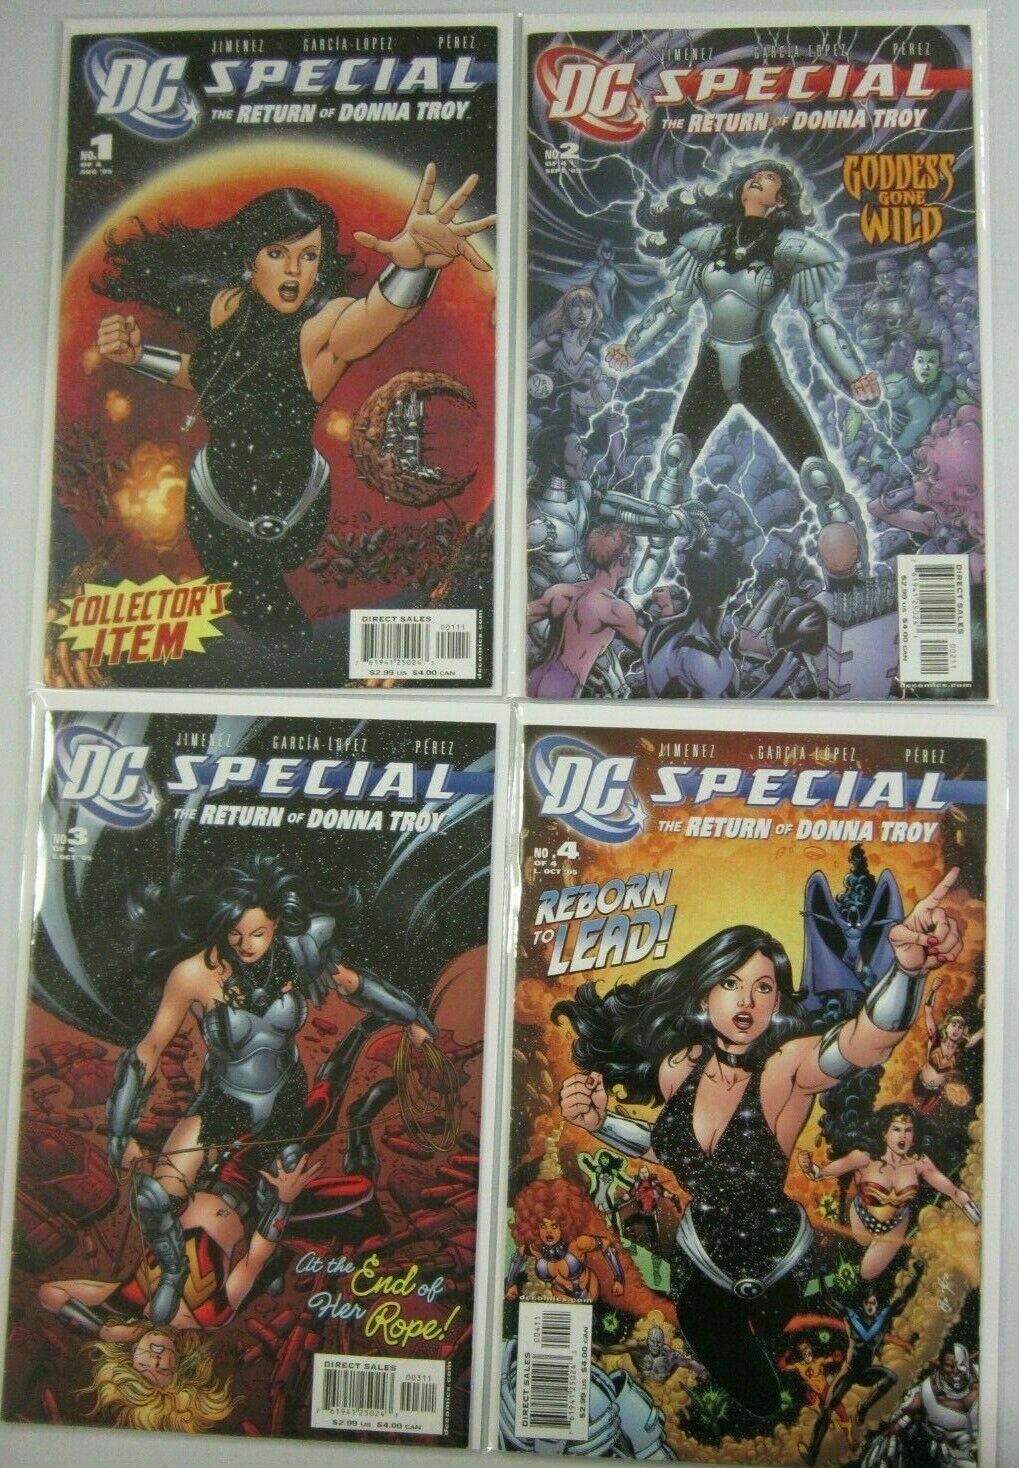 The Return of Donna Troy #1 - 4 - 4.0 VG - 2005